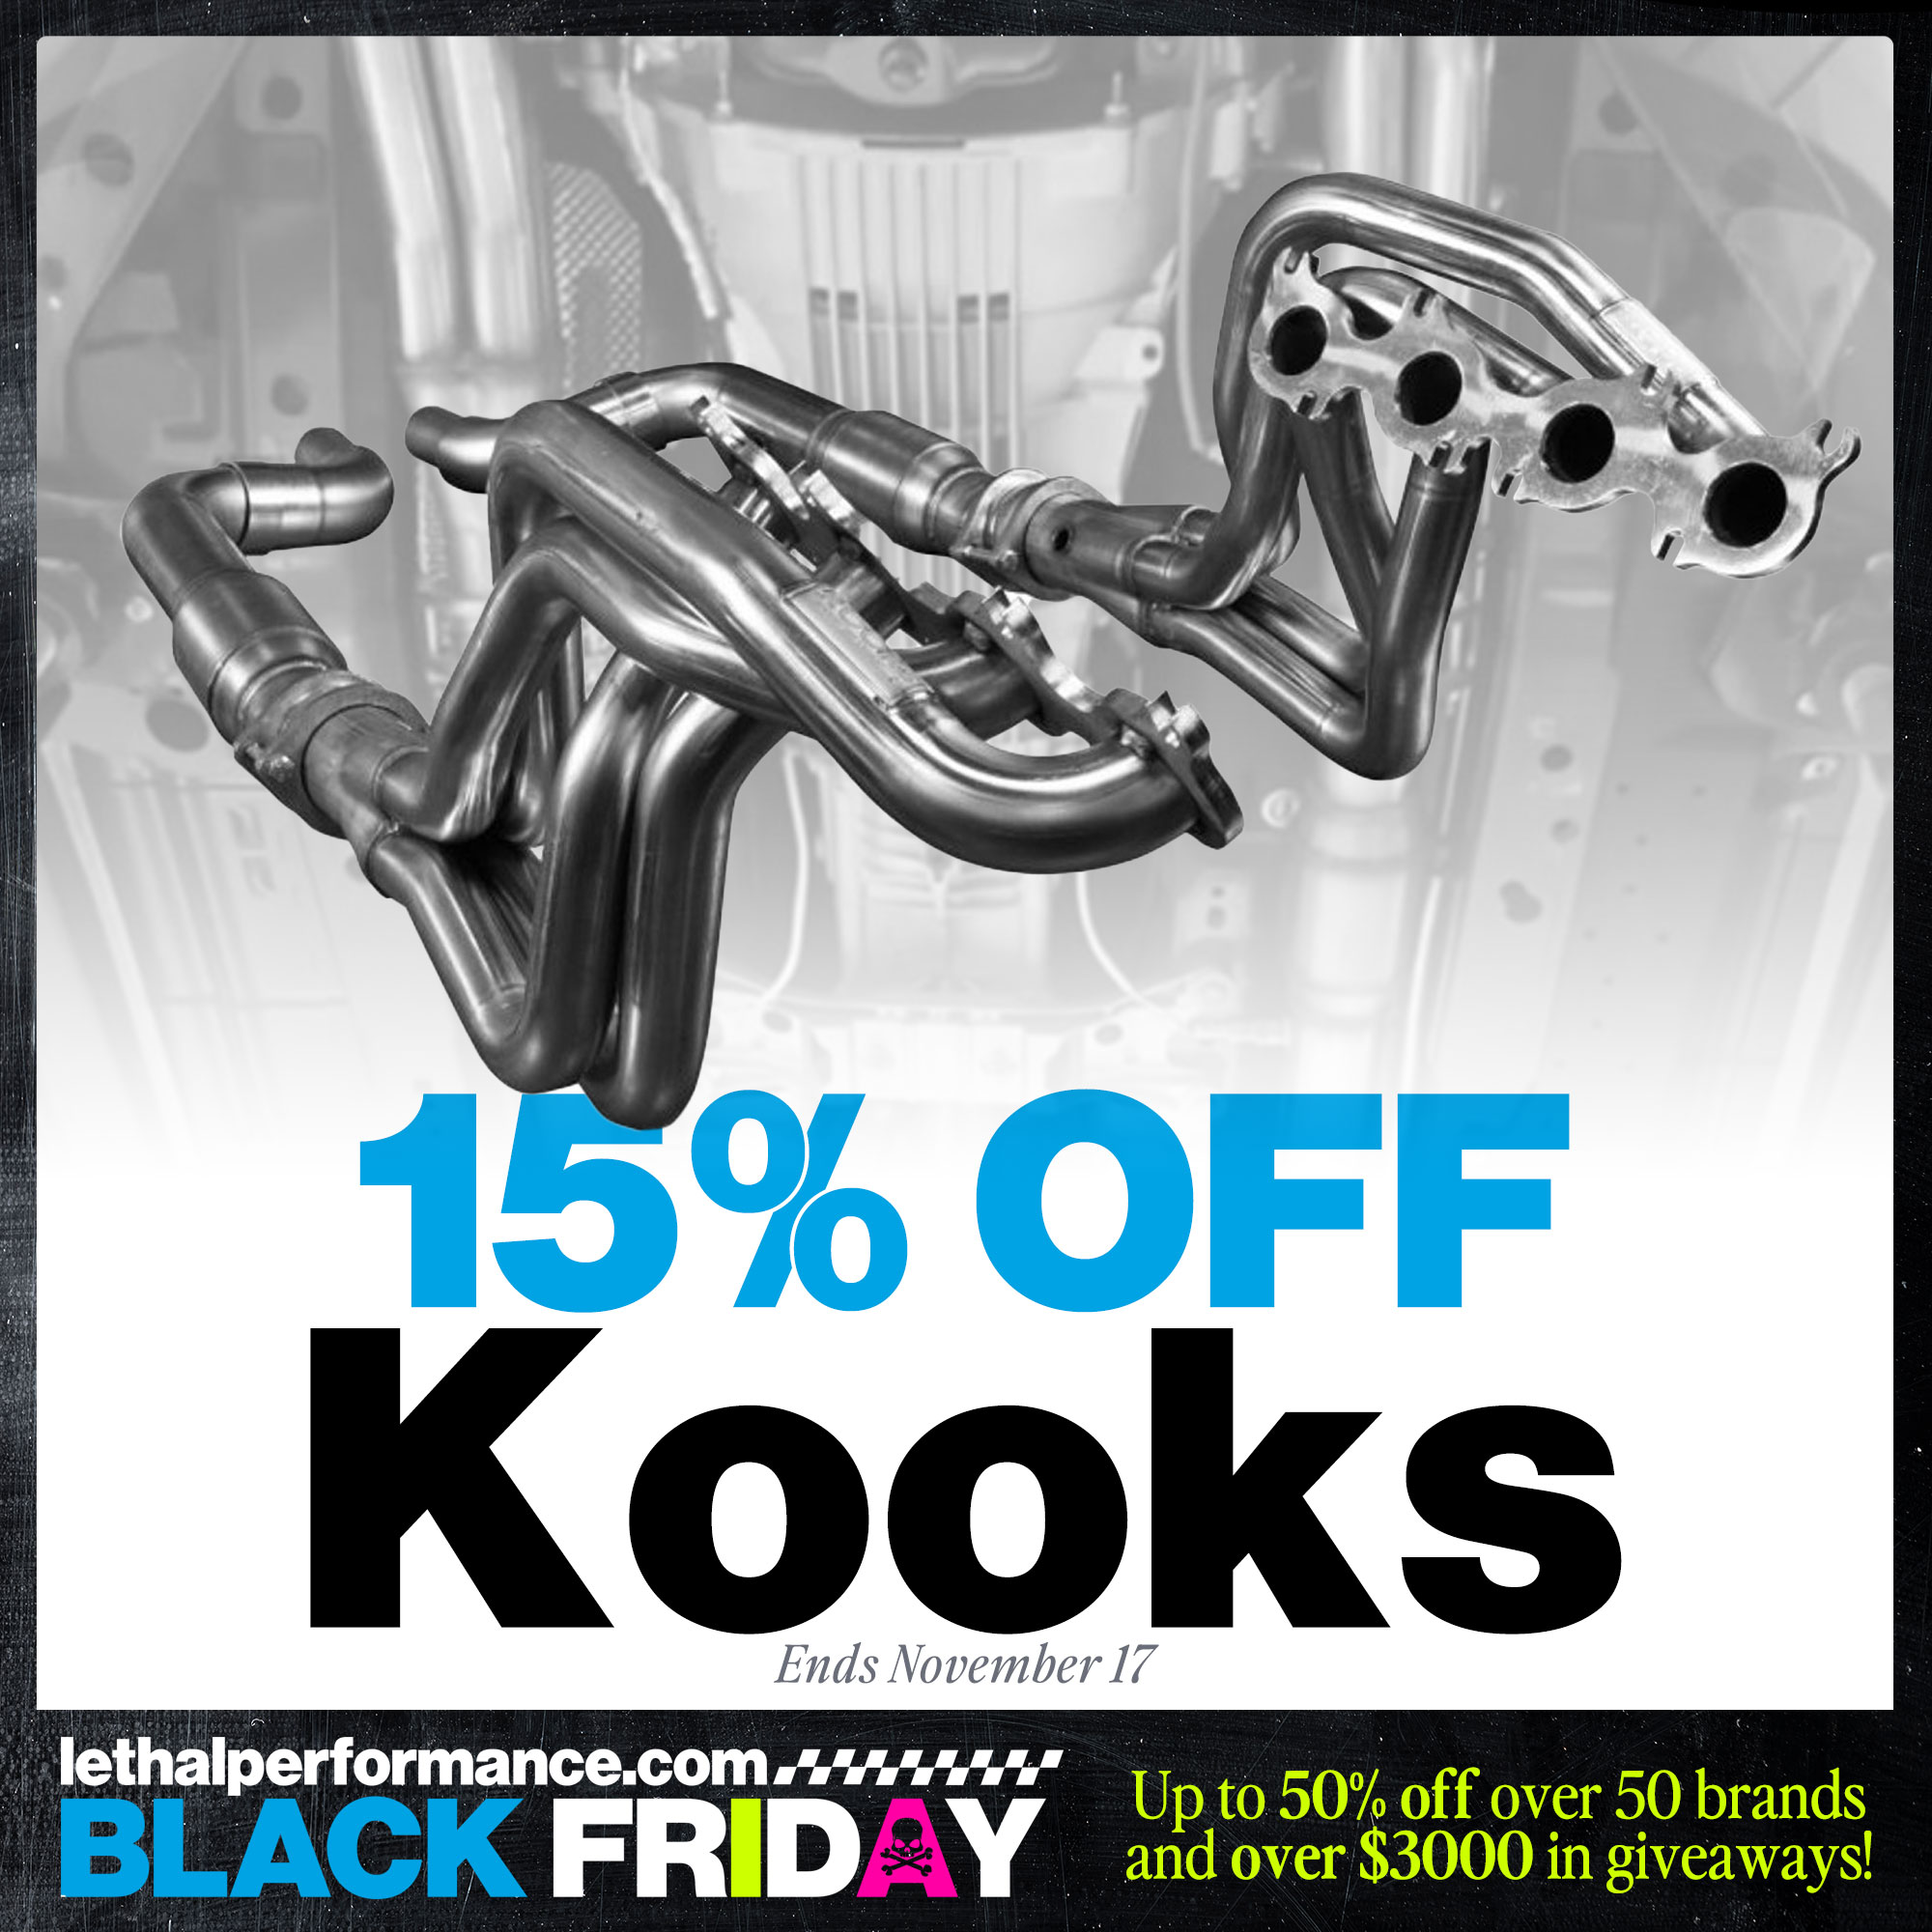 S650 Mustang Black Friday starts NOW! Up to 50% off! Kooks (1)